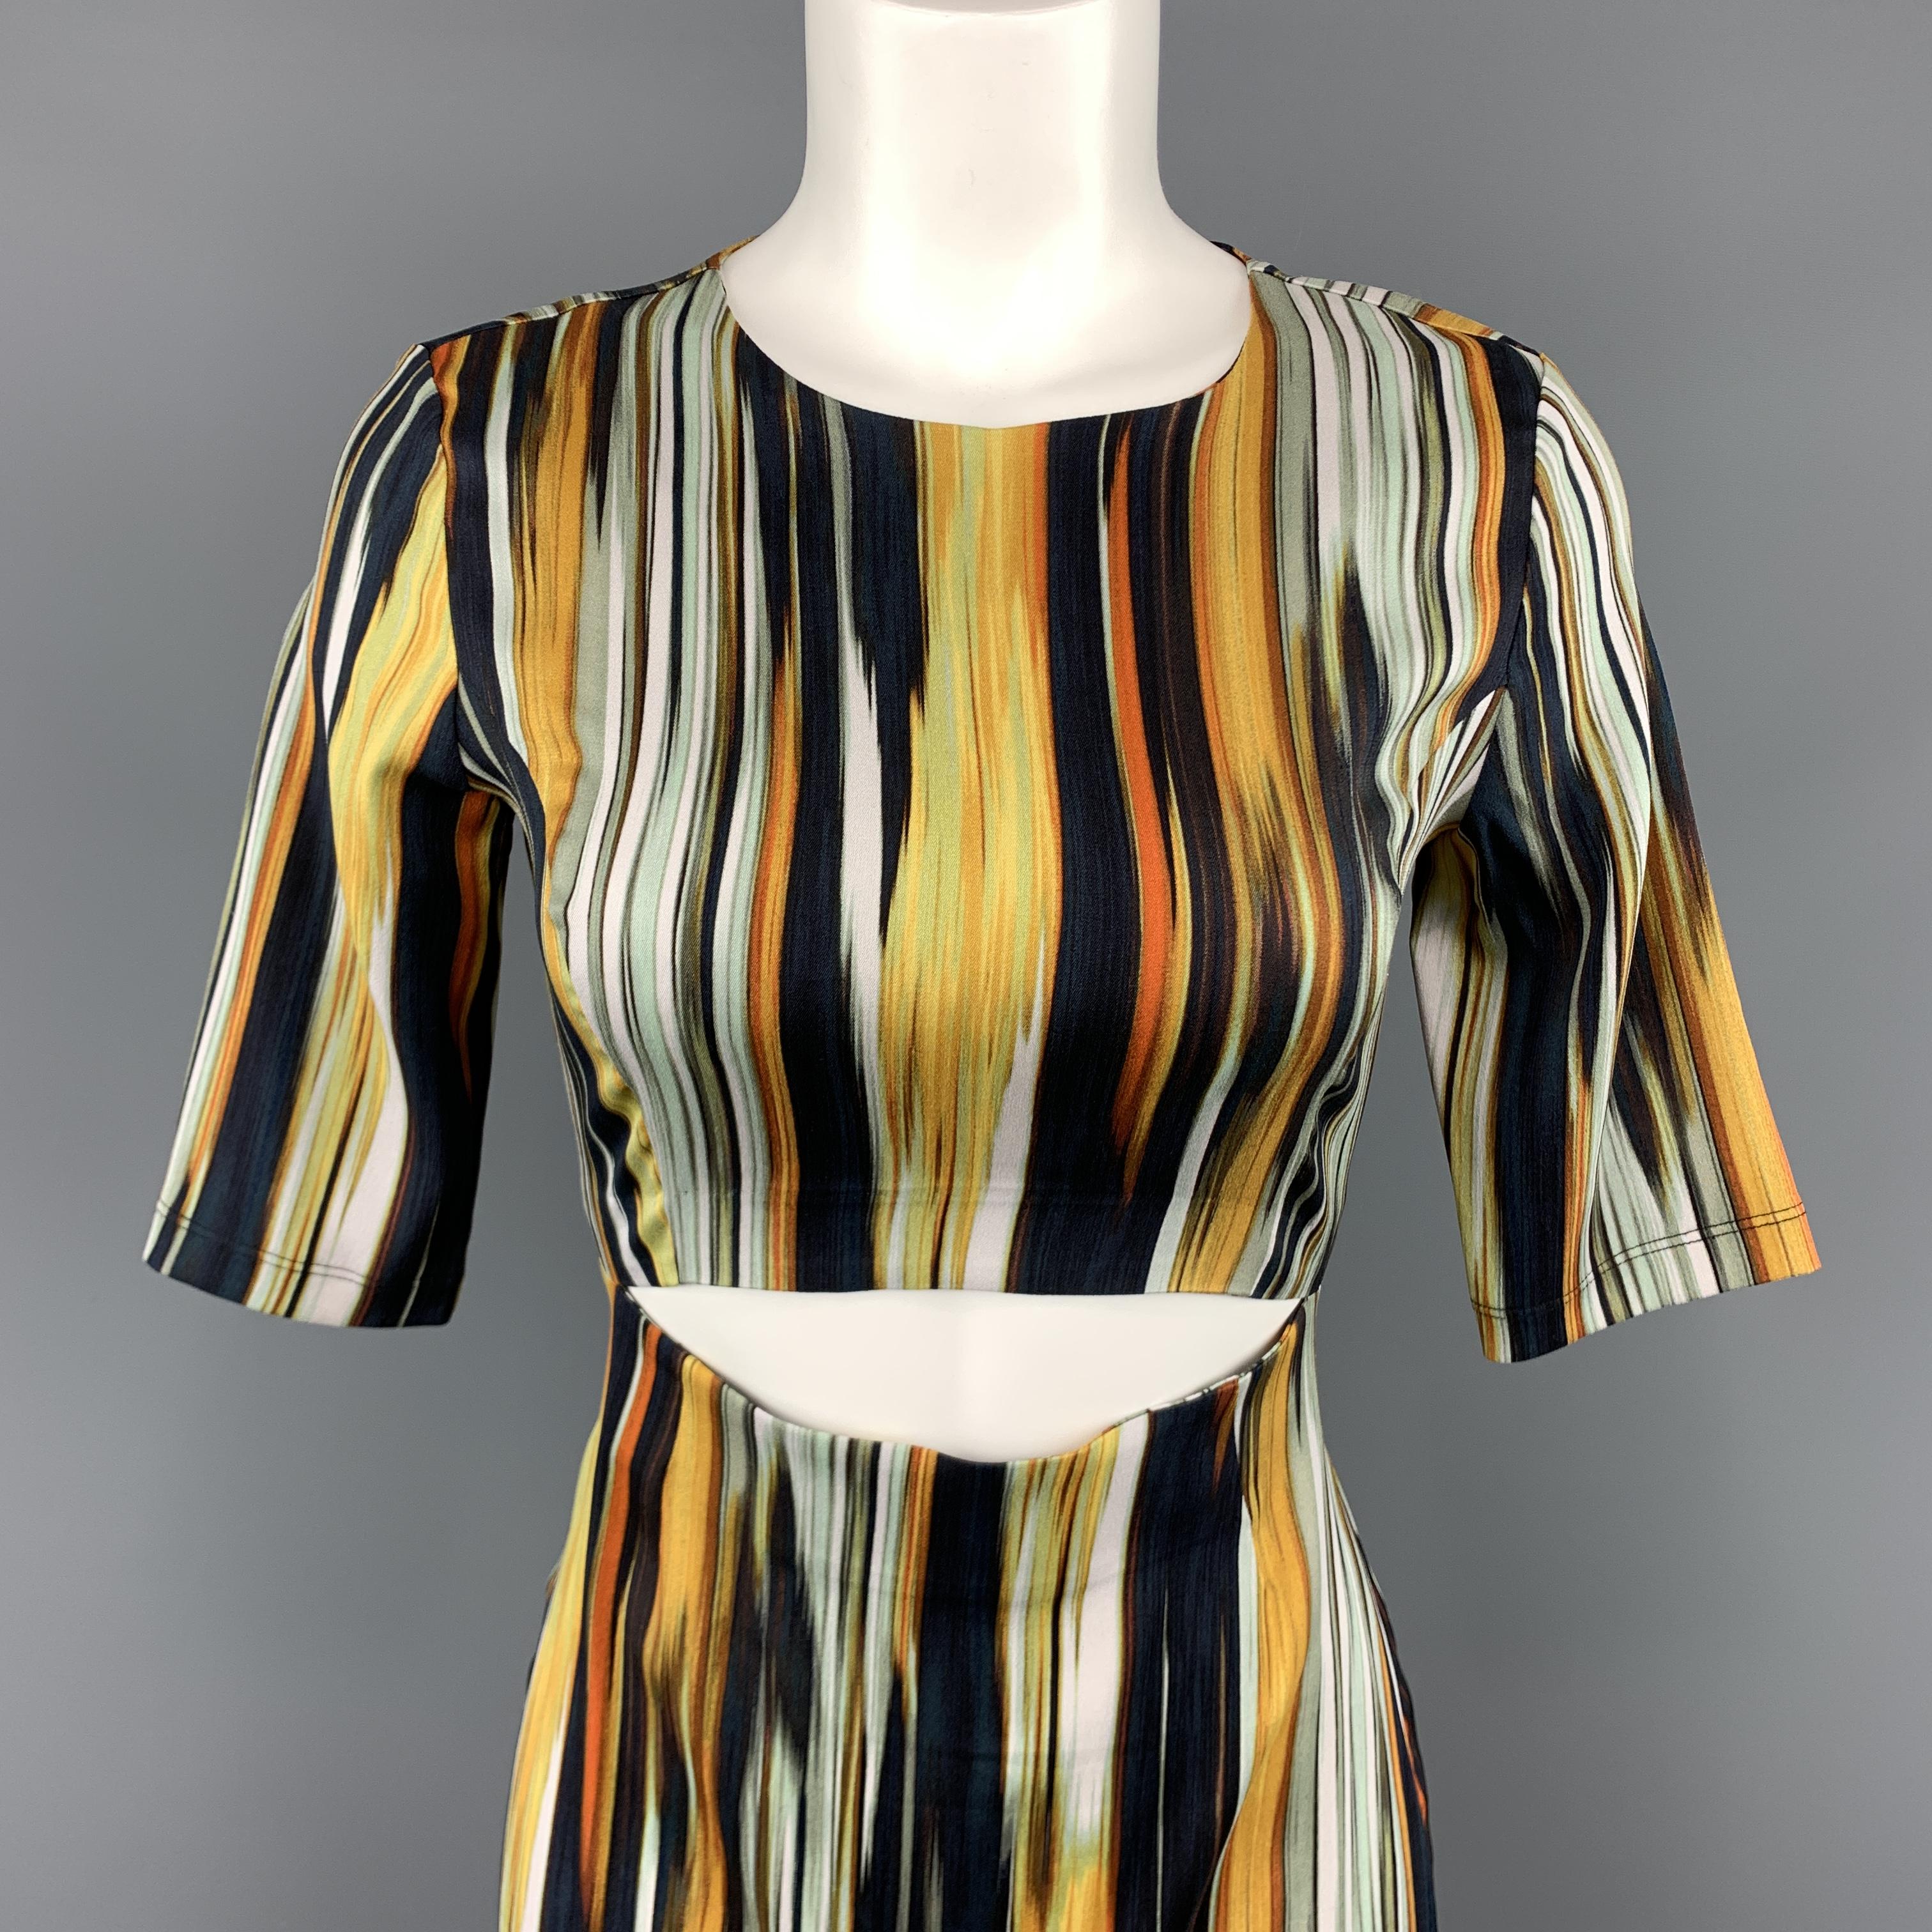 SUNO sheath dress comes in stretch silk with a mint, gold, and navy abstract stripe print featuring a round neckline, cropped sleeves, pencil skirt, and mid section cutout. 

New with Tags.
Marked:  2

Measurements:

Shoulder: 13 in.
Bust: 34